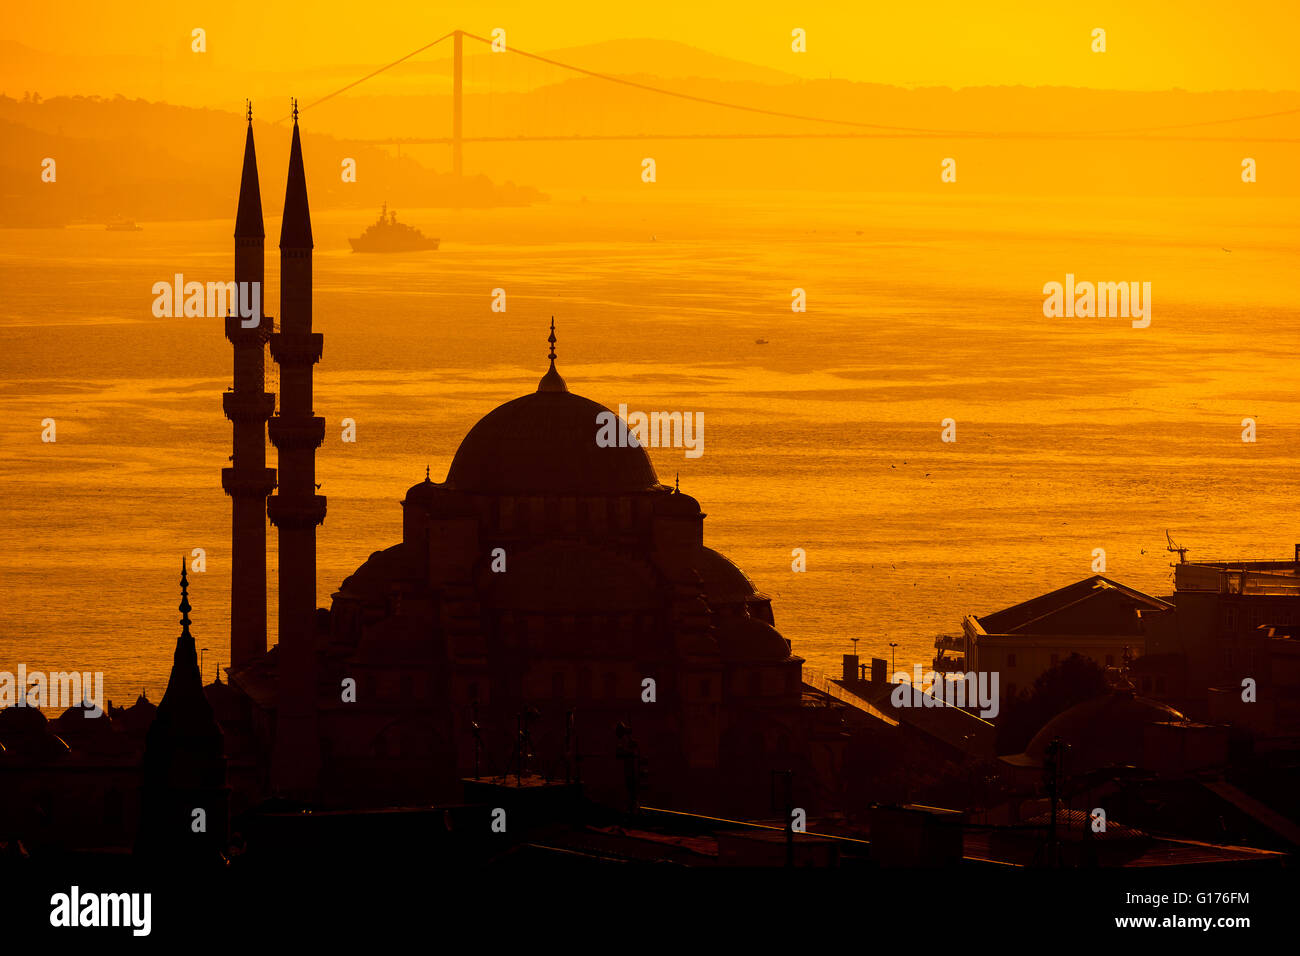 Mosque sihouette, Istanbul Stock Photo